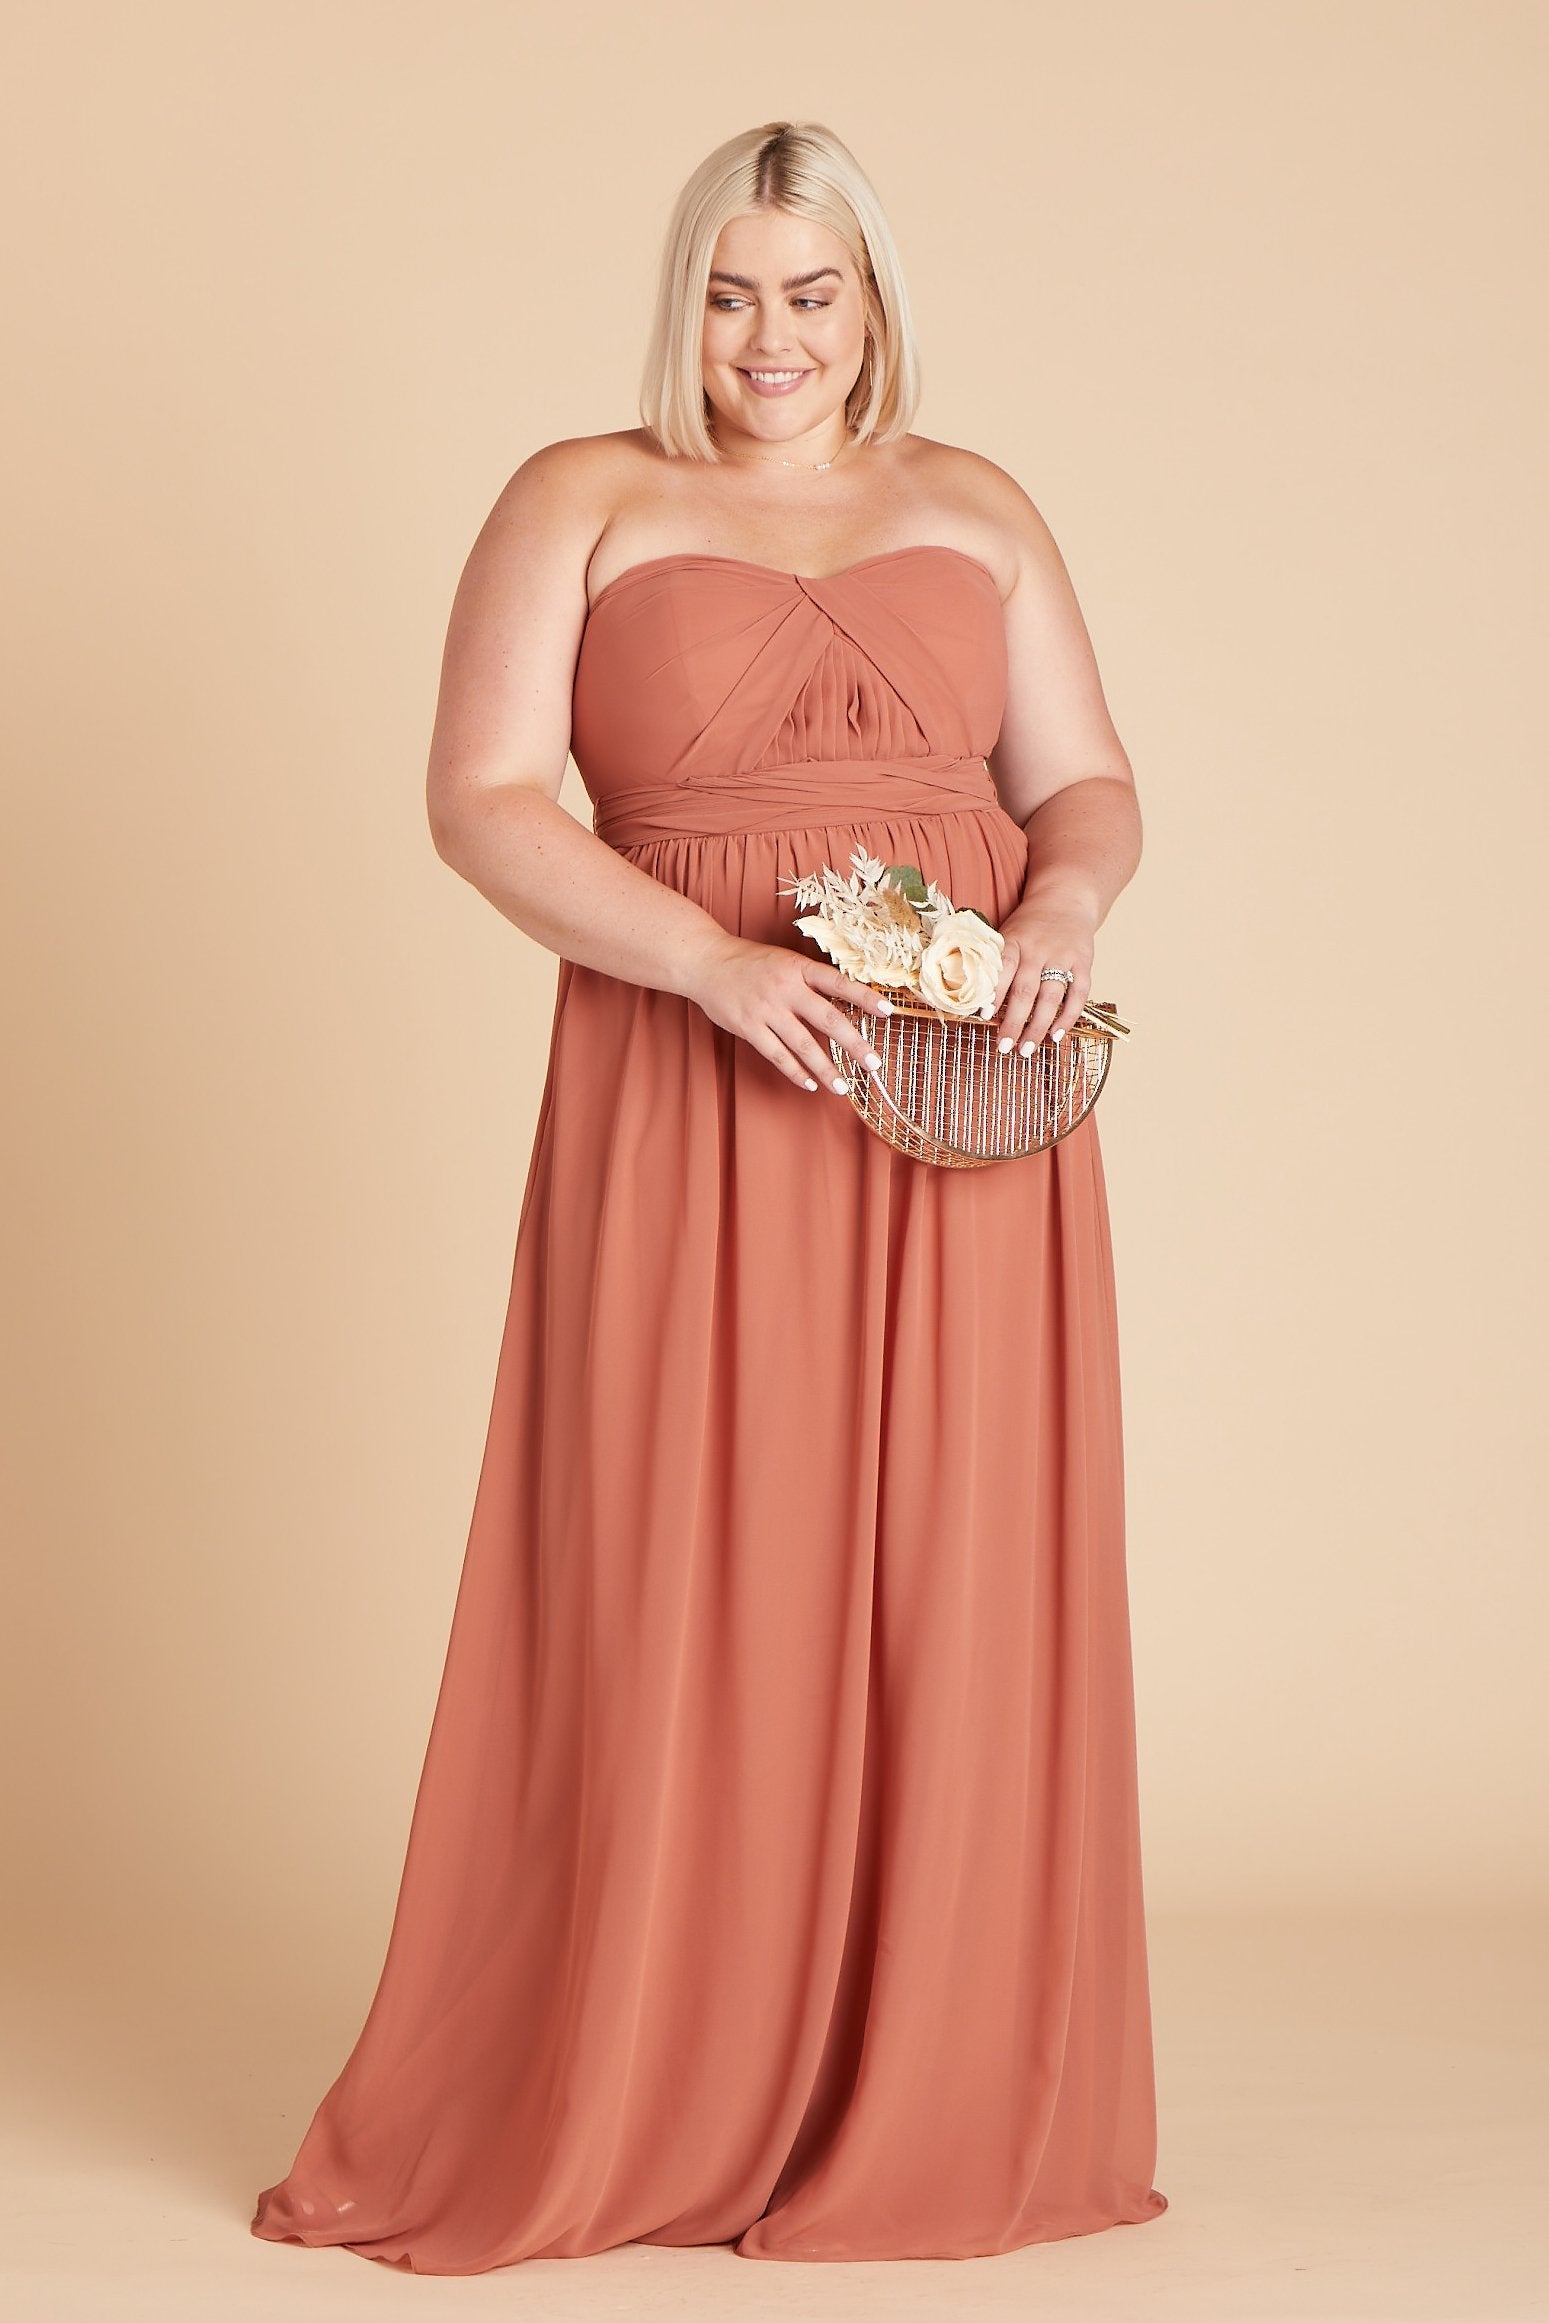 Grace convertible plus size bridesmaid dress in terracotta orange chiffon by Birdy Grey, front view